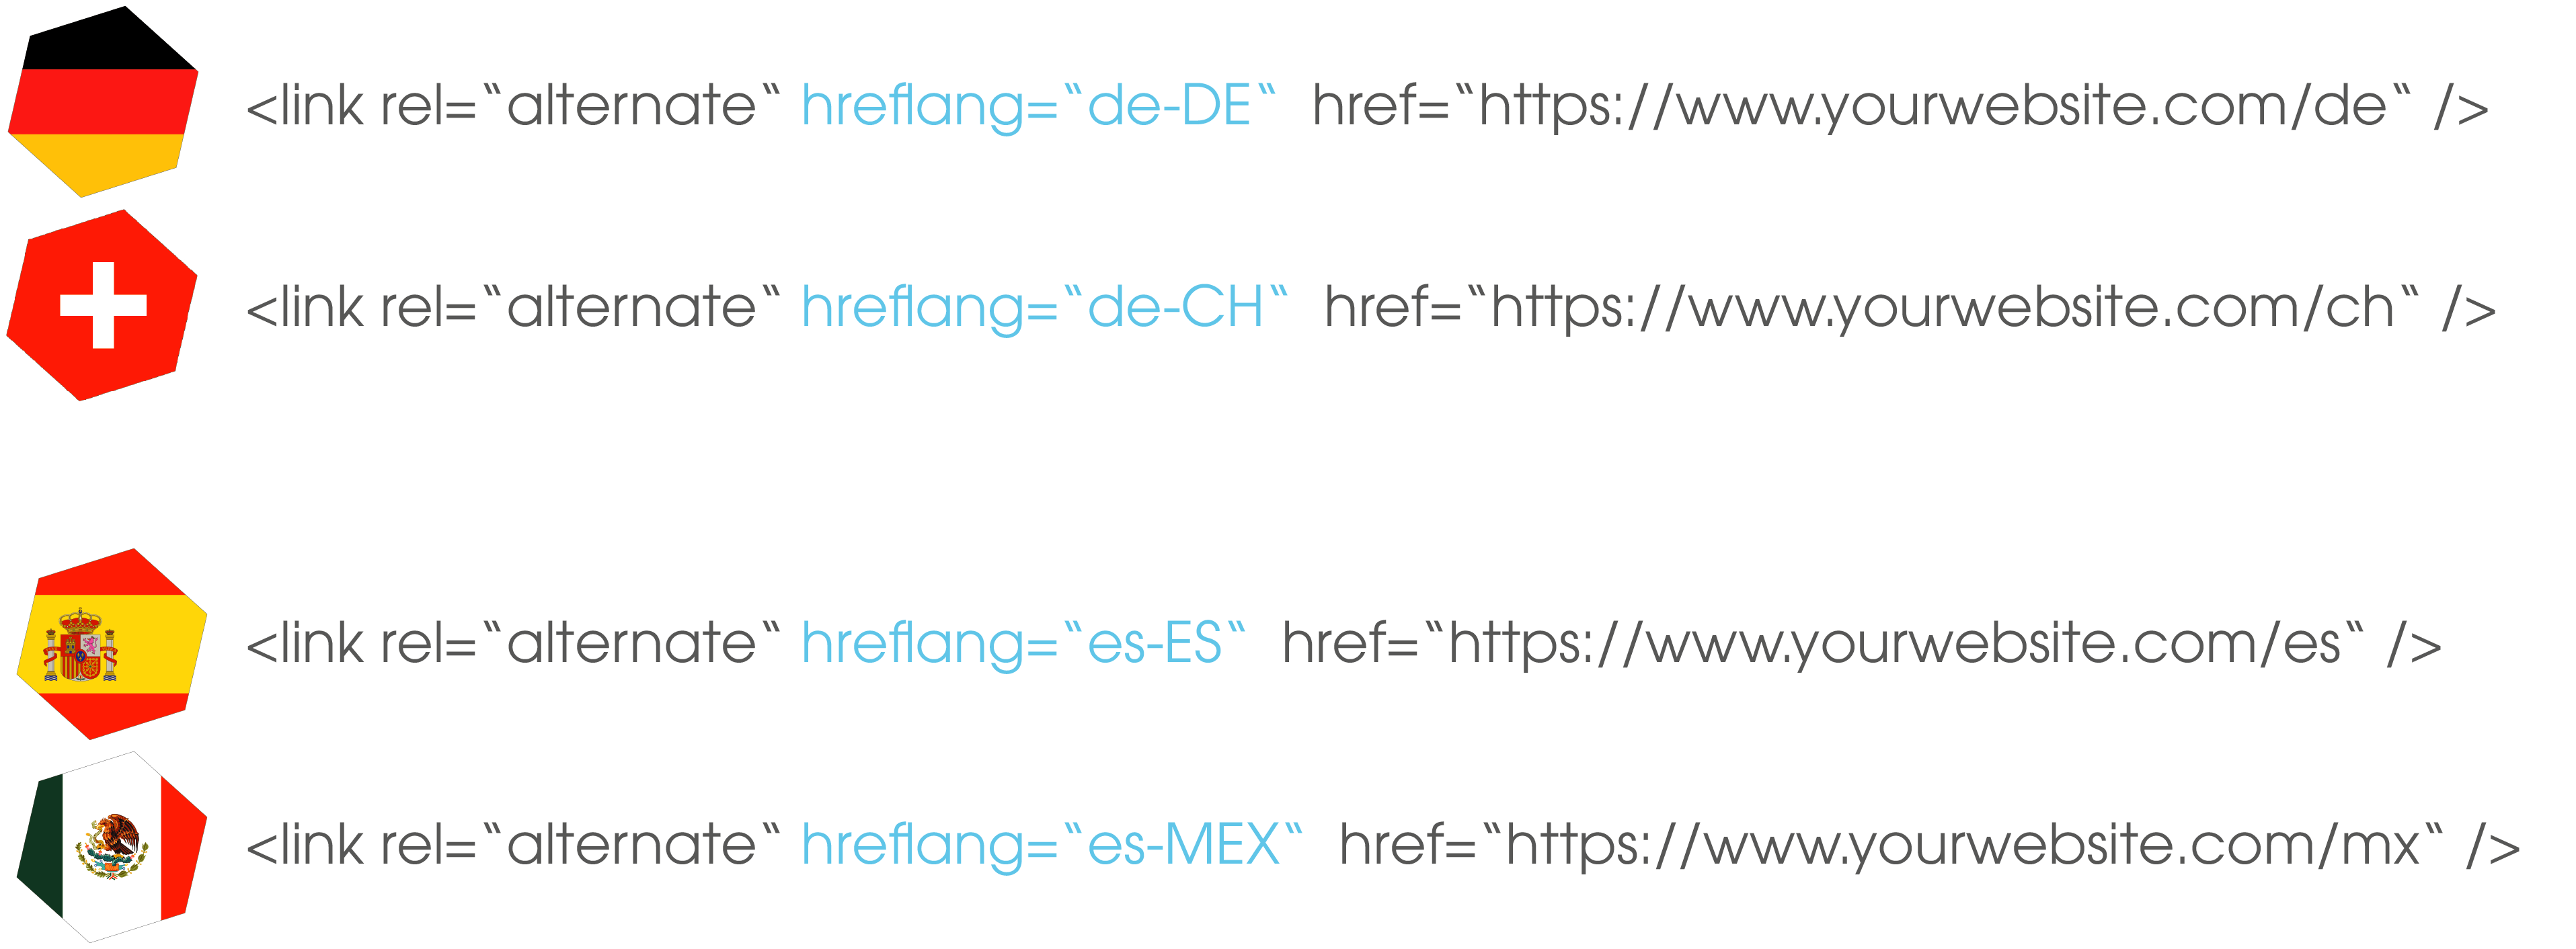 The image shows four different examples in which link elements are equipped with hreflang attributes. The upper two examples are both German-language, but once with the alignment Germany (upper) and once with the alignment Switzerland (lower). The lower example is analogous, but with the language "Spanish" and the alignments "Spain" and "Mexico".